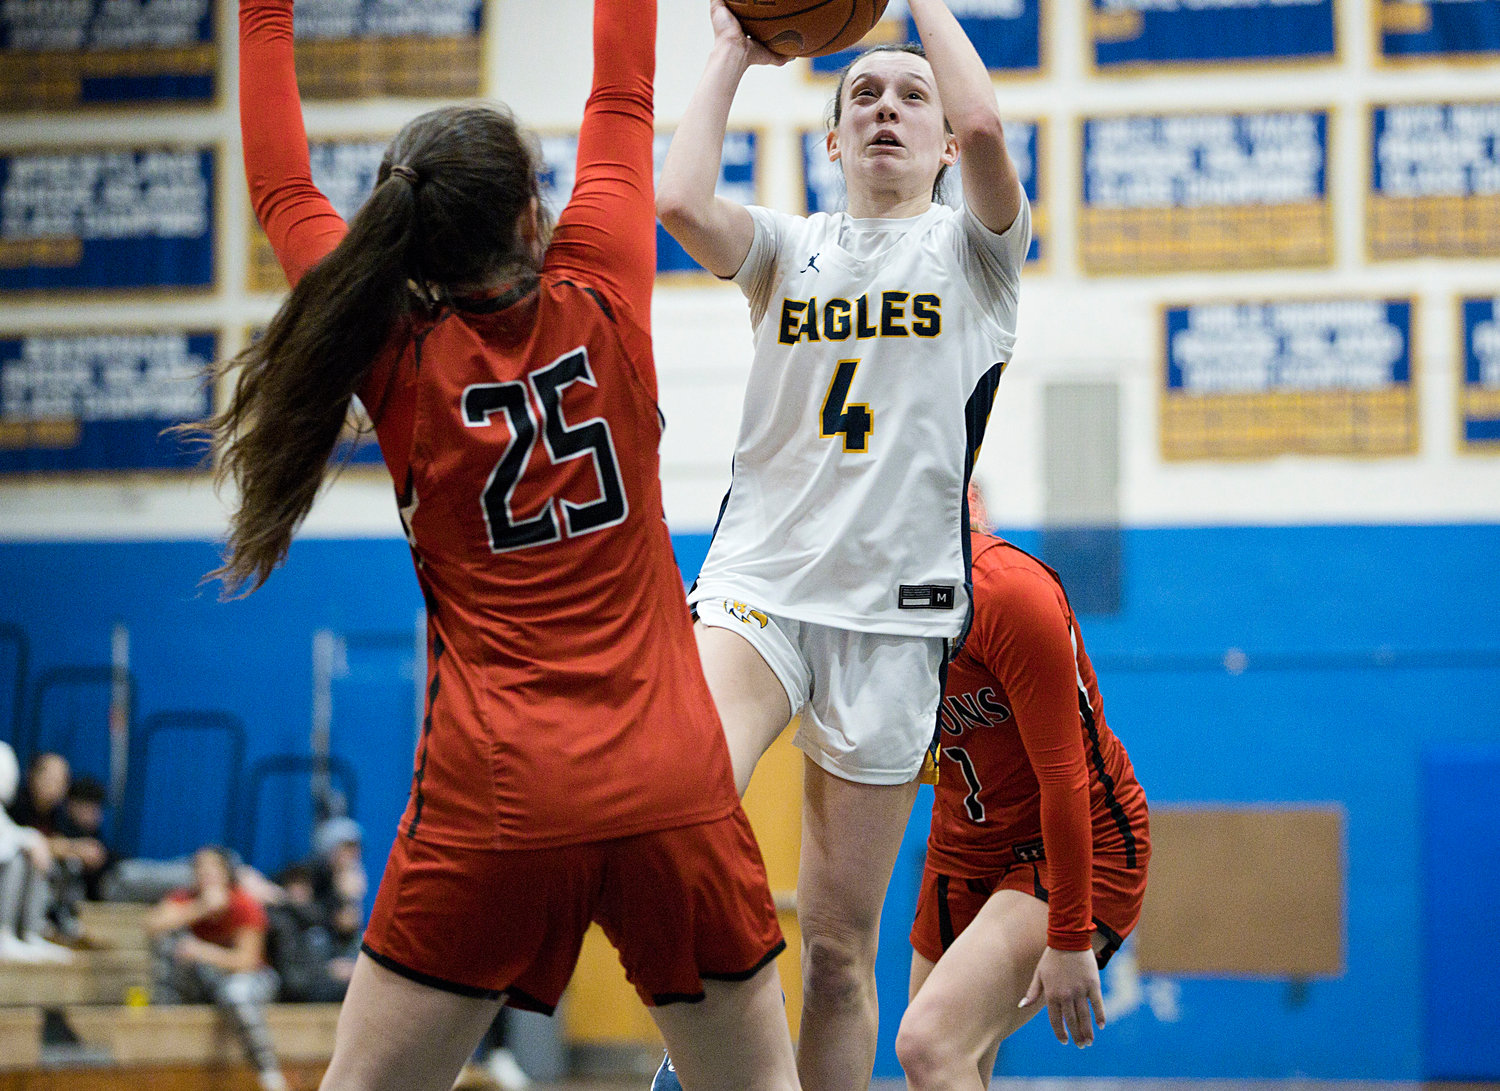 Maddie Gill goes in for a layup during the second half of Tuesday's game against Cranston West.